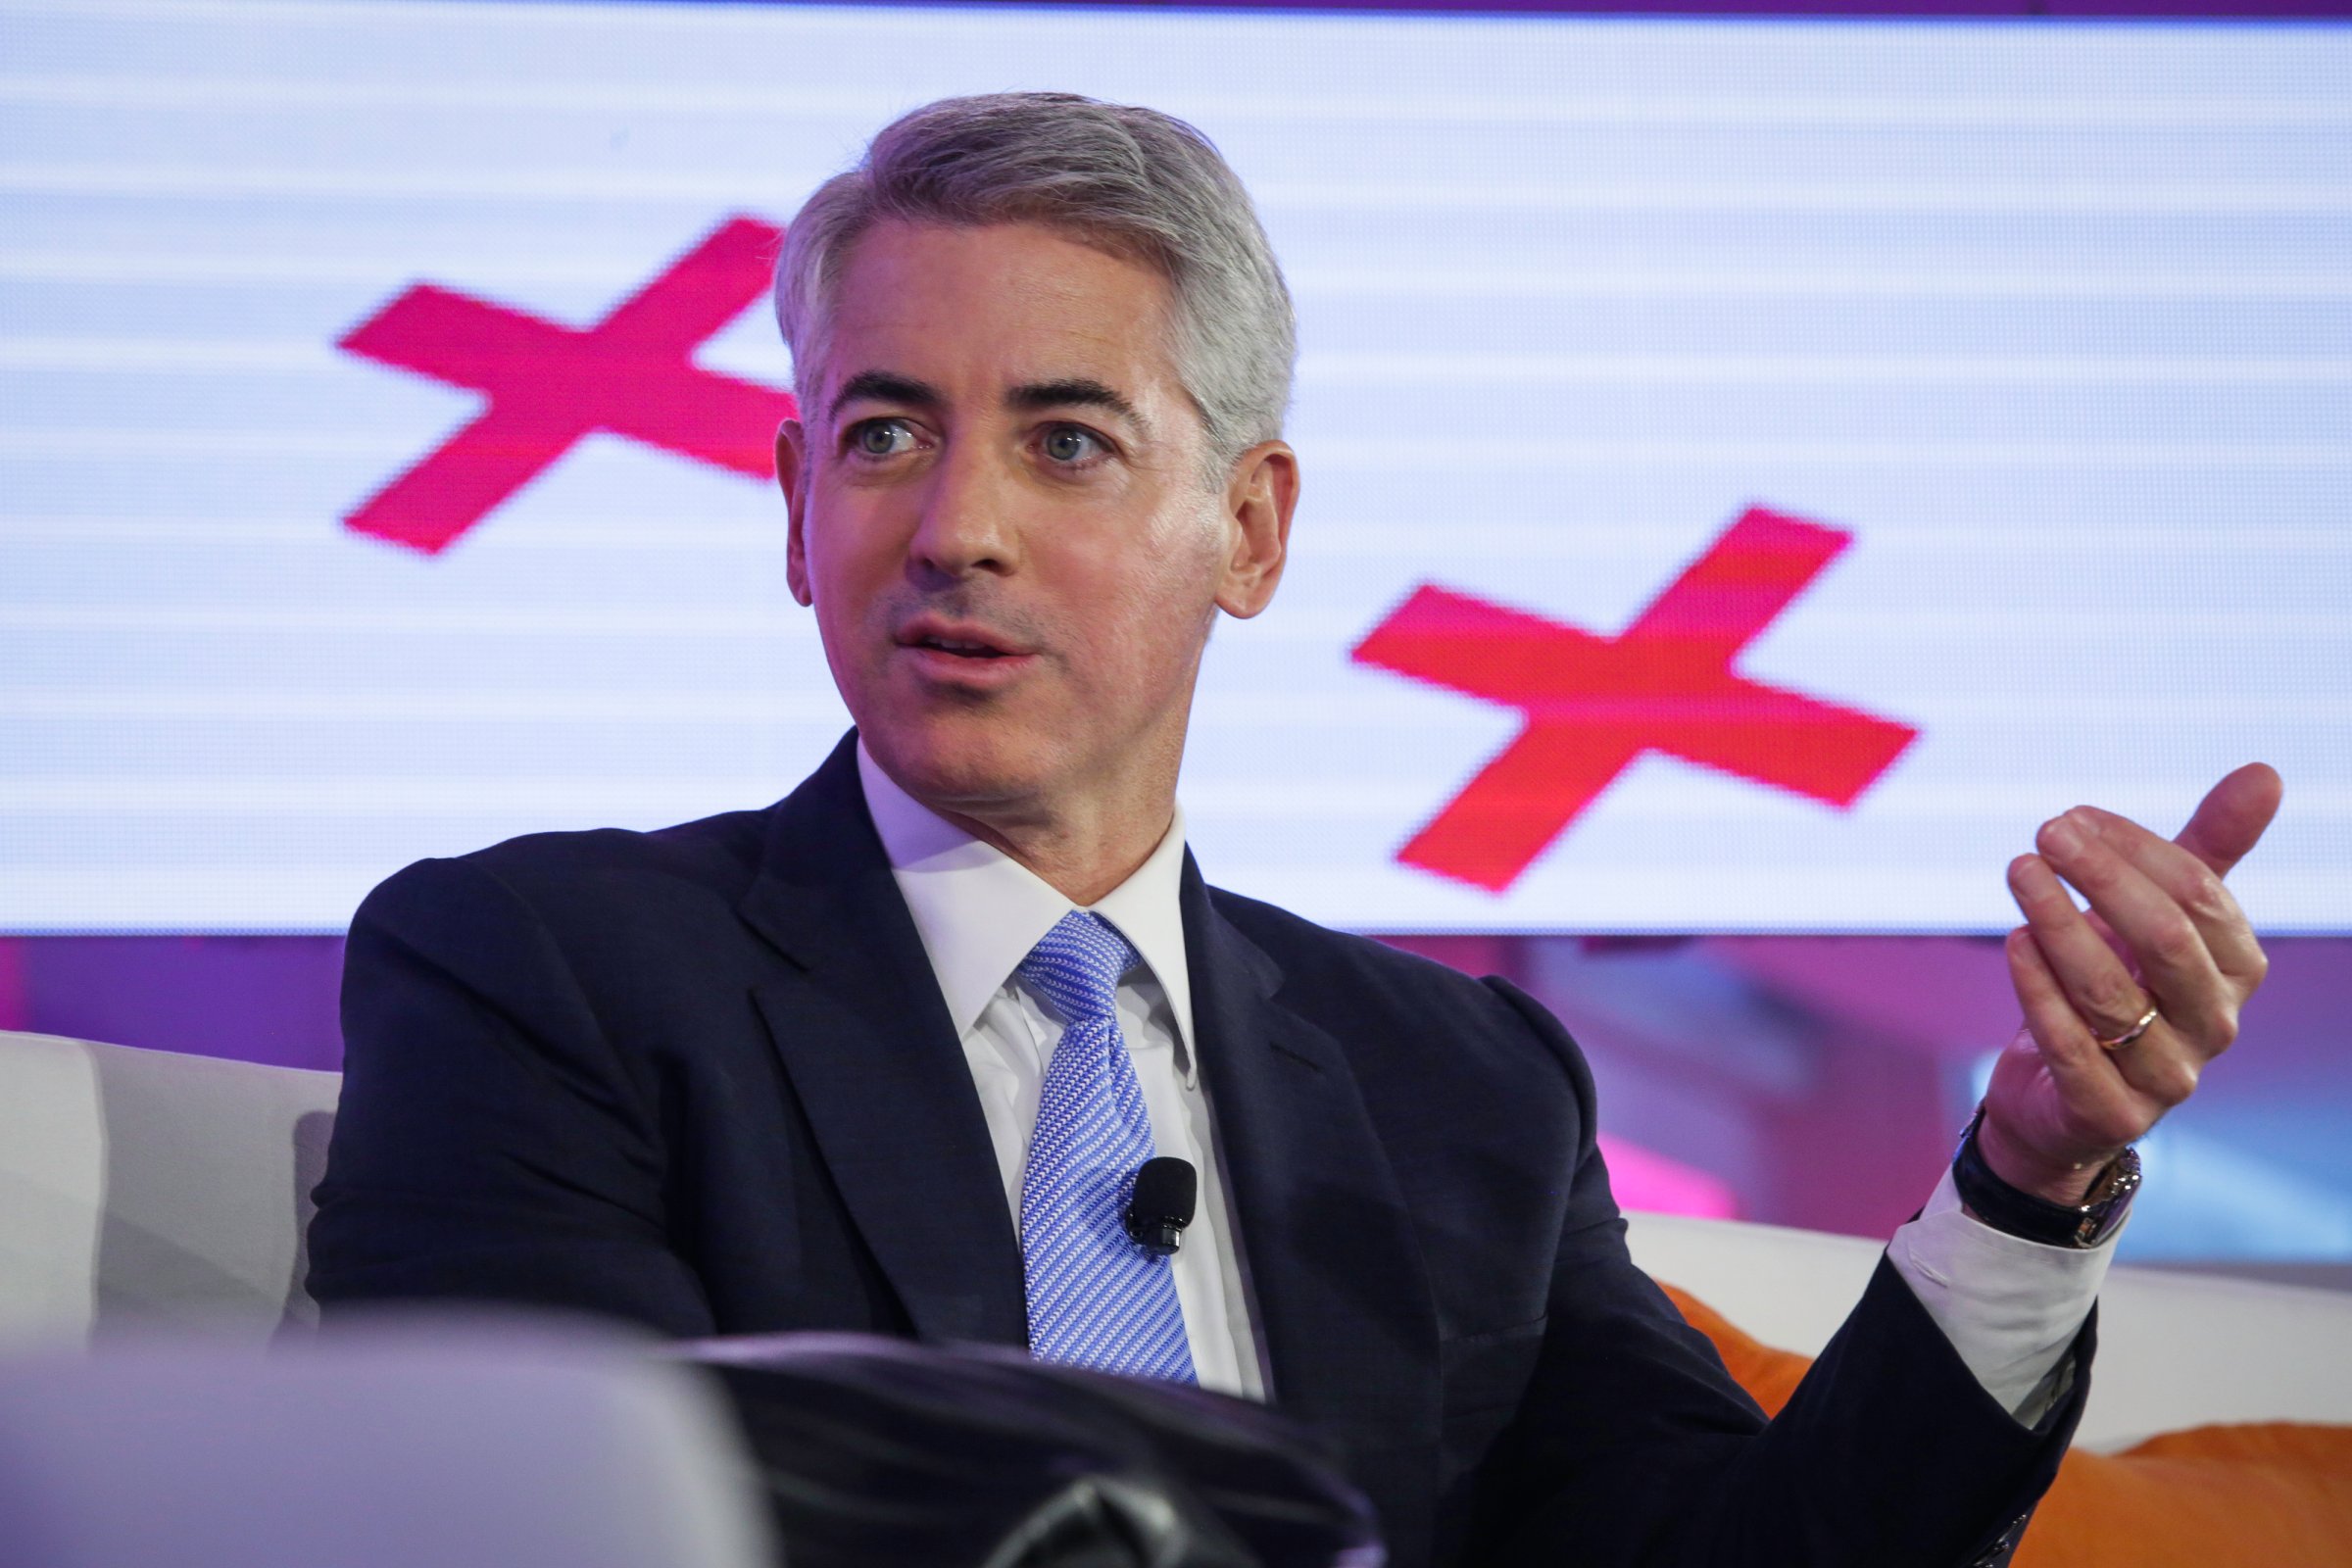 William "Bill" Ackman, founder and chief executive officer of Pershing Square Capital Management LP, speaks at the Bloomberg Markets Most Influential Summit 2015 in New York, U.S., on Tuesday, Oct. 6, 2015.